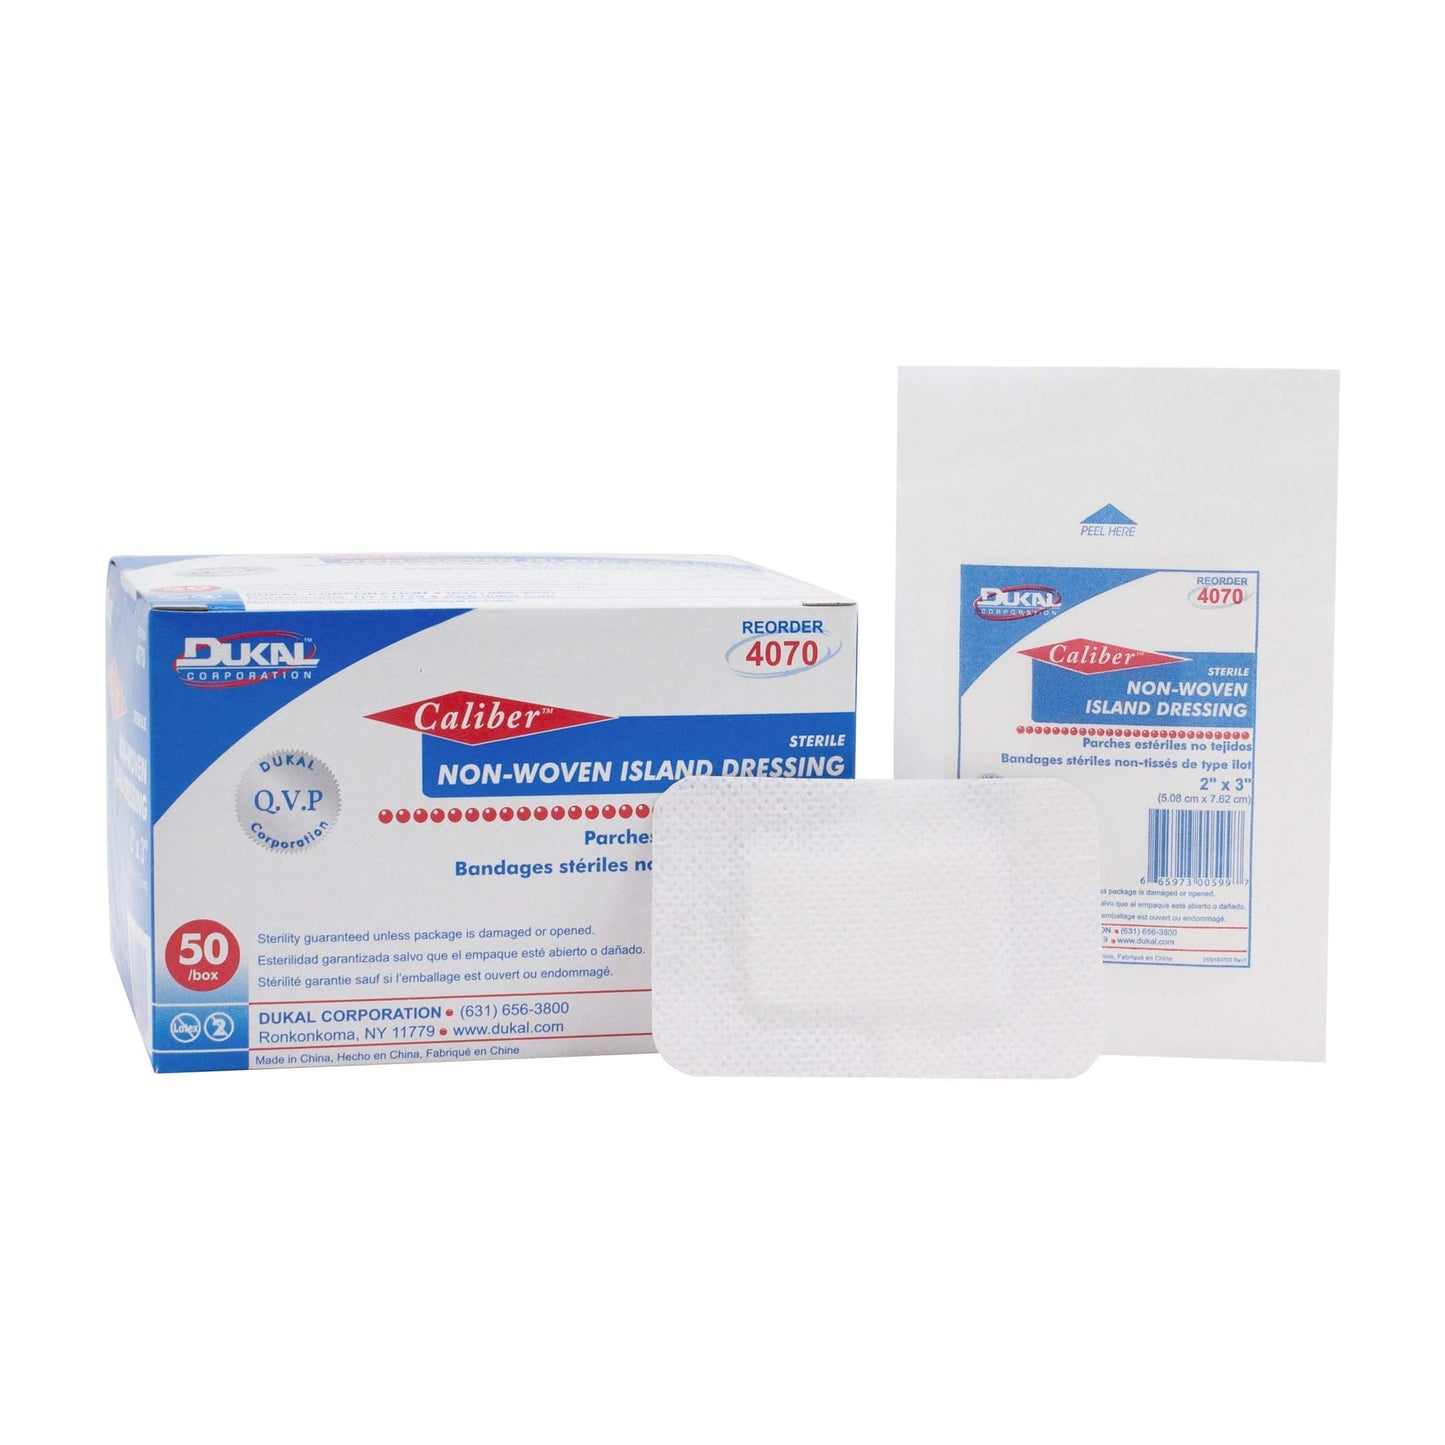 4070 Dressing Caliber Island Wound LF St Cotton 2x3" Non-Woven 50 Per Box Part No. 4070 by- Dukal Corporation-Dukal-Brand_Dukal/ Dawn Mist,Collection_Lifestyle,Dukal_ Bandage,Dukal_Medical,Life_Medical